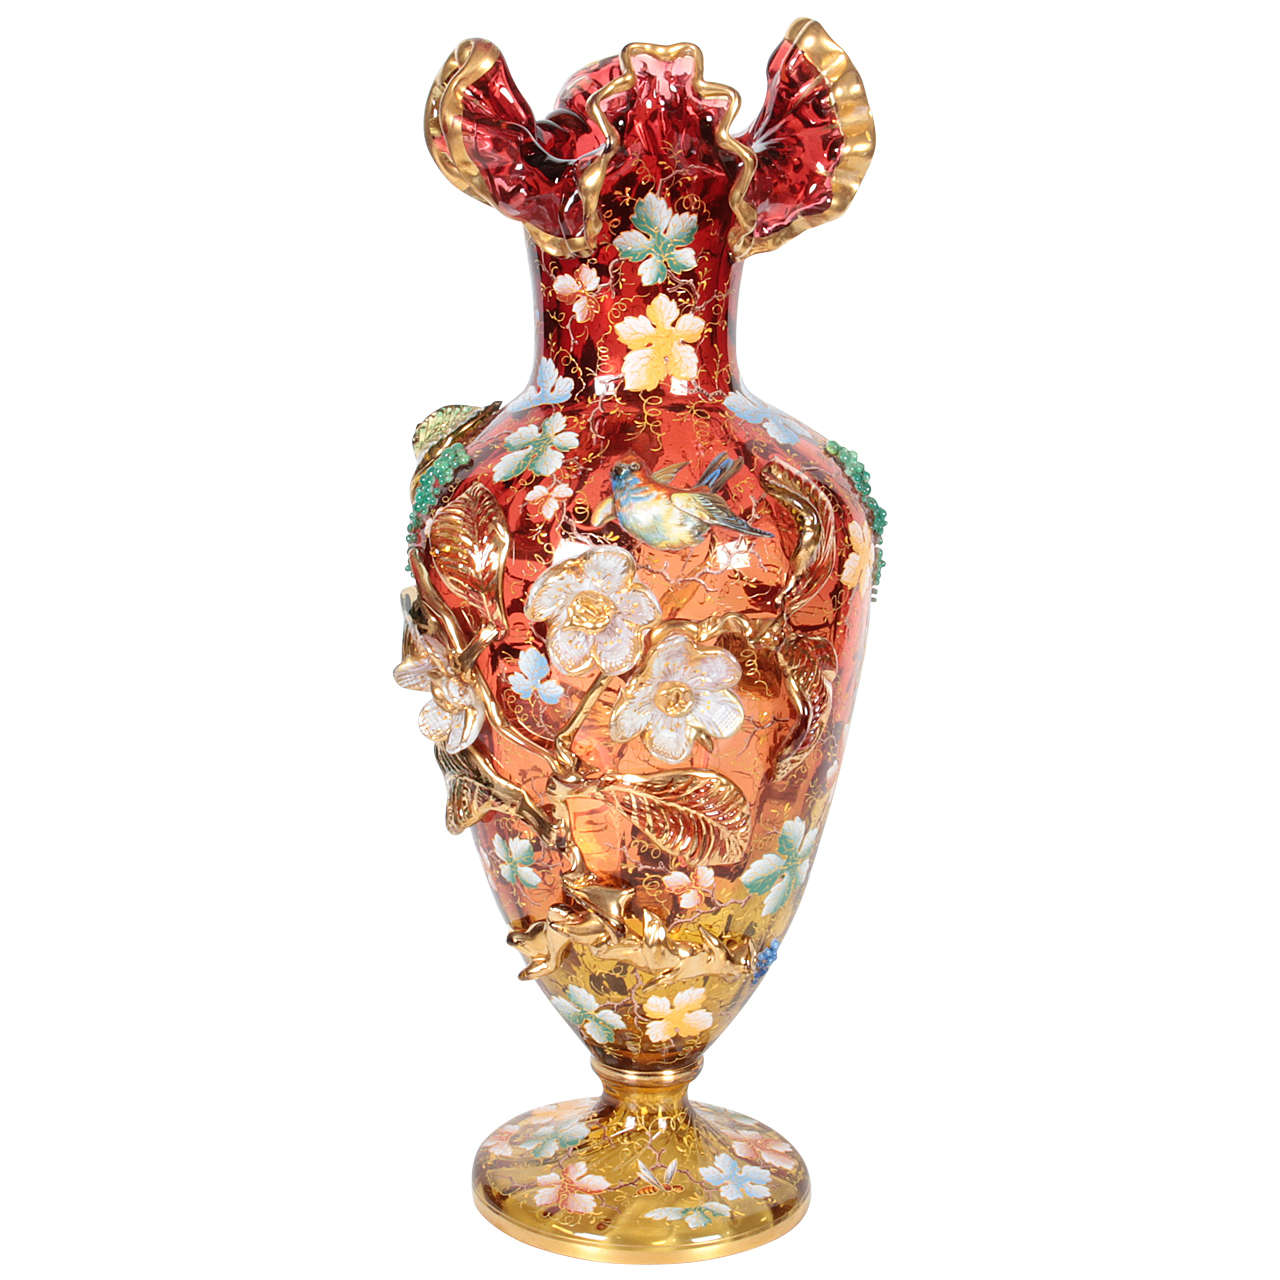 Moser Glass Amberina Red Vase with Raised Flowers, Leaves, Jewels and Bird